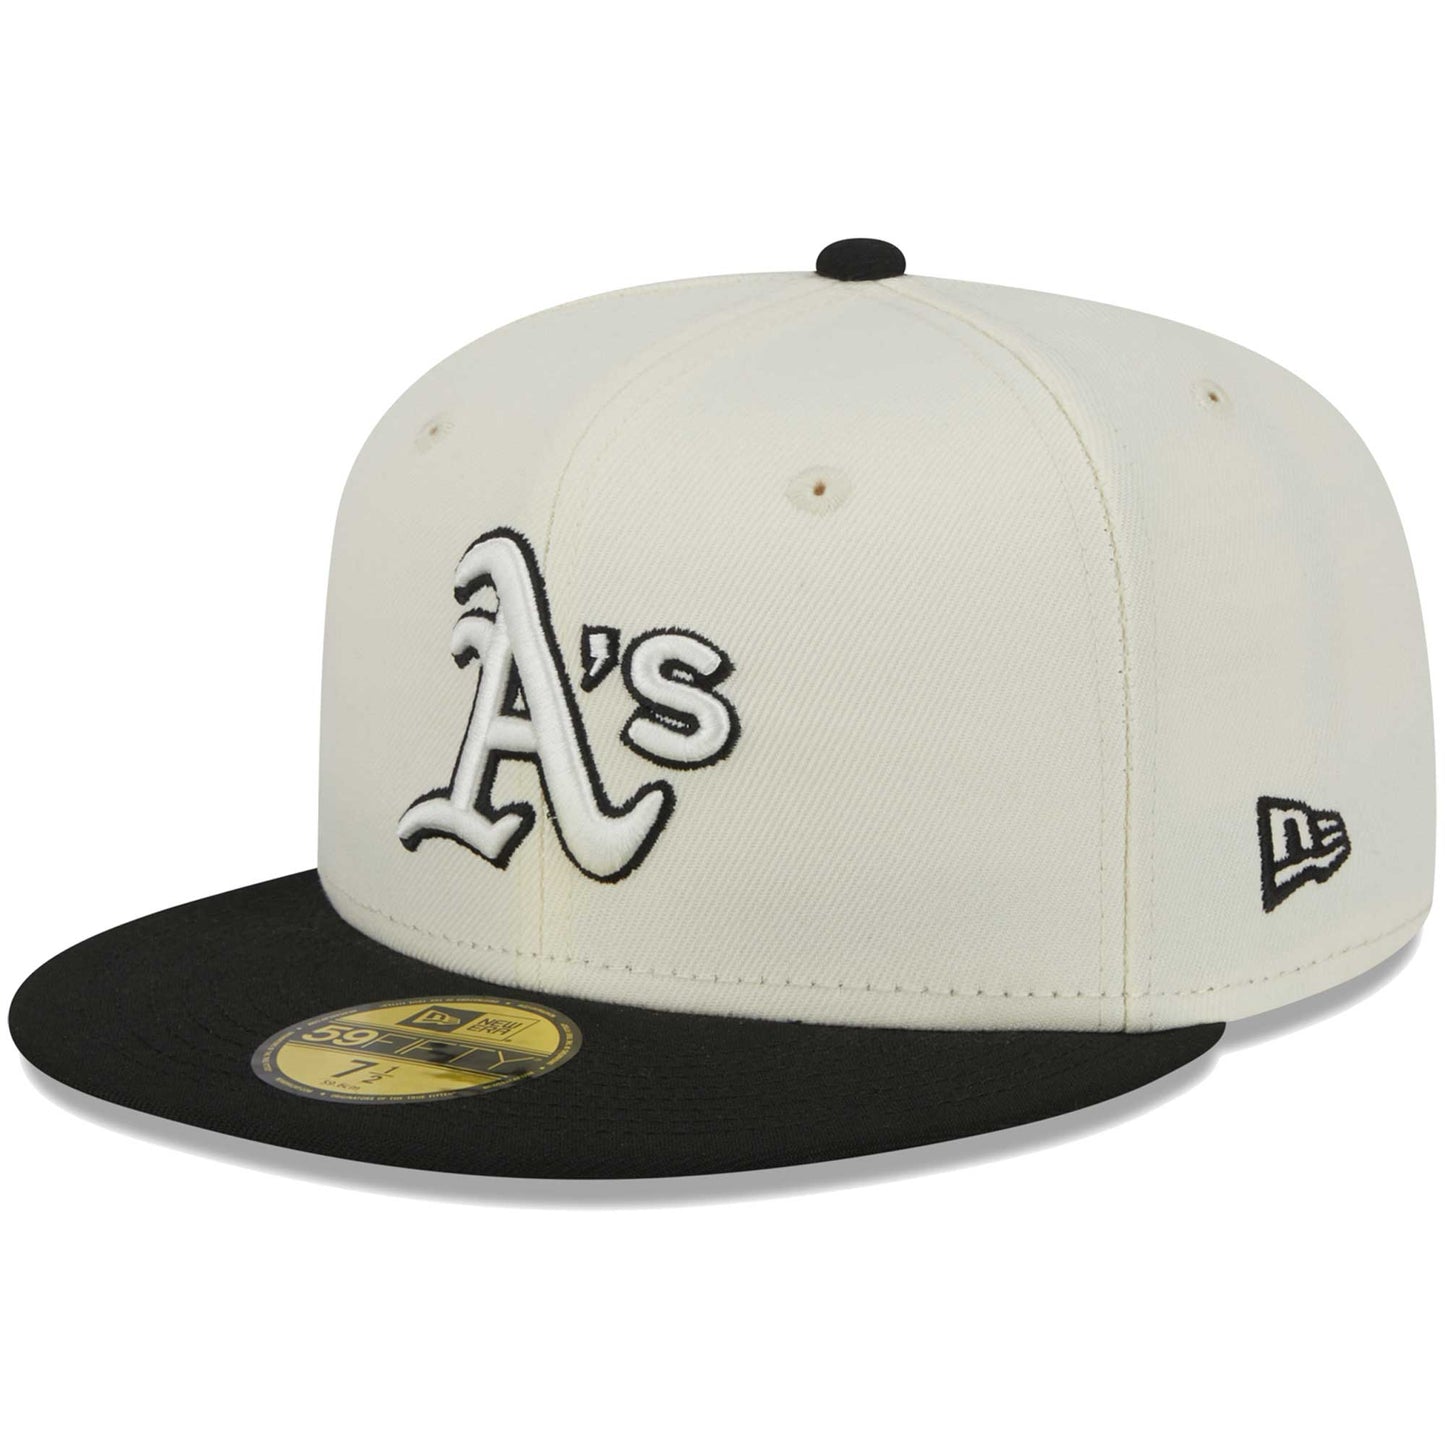 Oakland Athletics New Era Chrome 59FIFTY Fitted Hat - Stone/Black